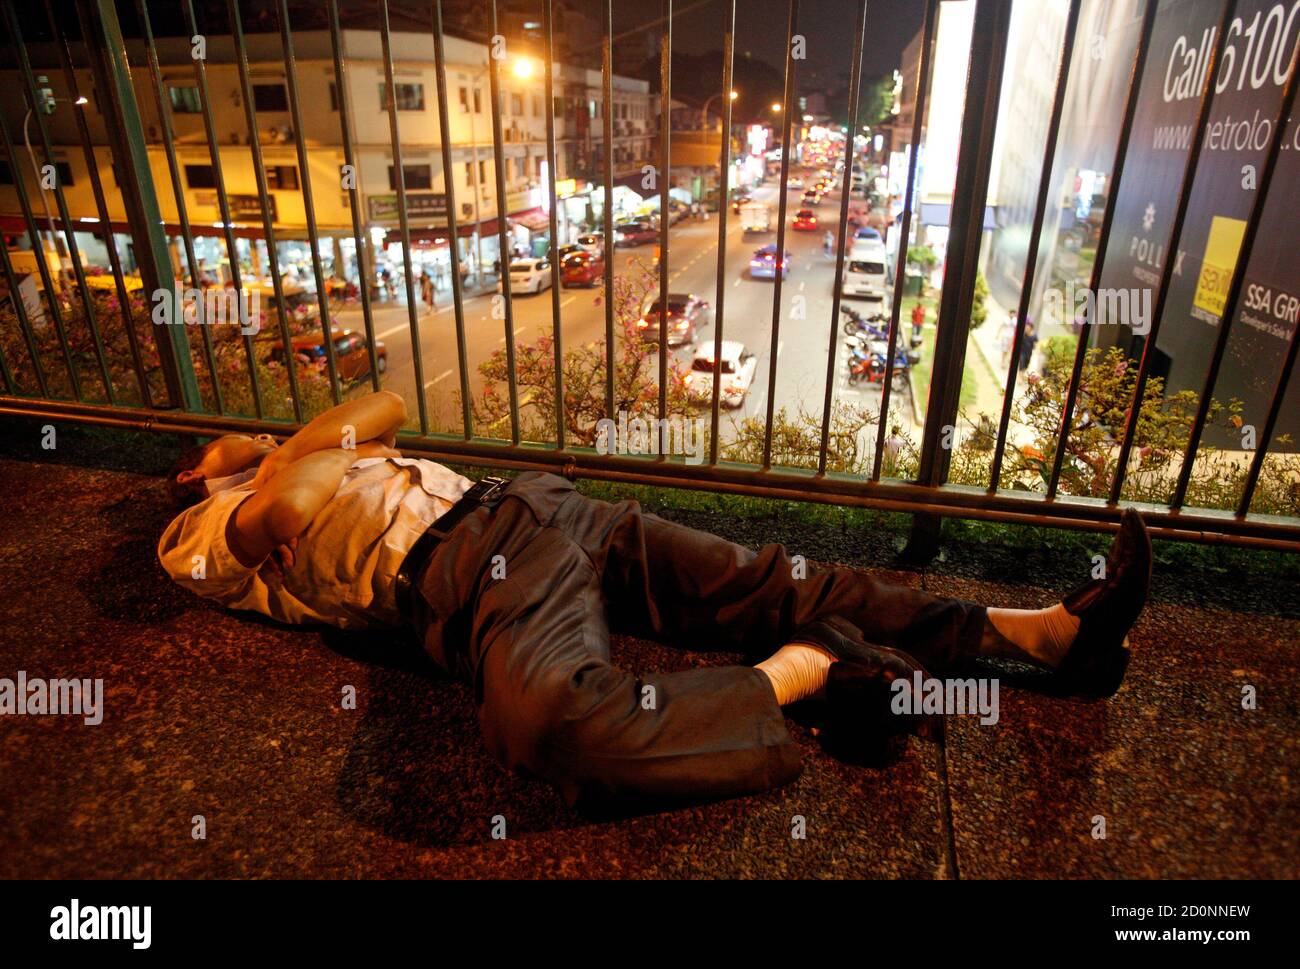 A man is pictured unconscious on an overhead pedestrian bridge overlooking Geylang district in Singapore February 8, 2013. Singapore has long cultivated a reputation as a clean, safe and regimented place to live and do business in a turbulent region, but the apparently major role of Singaporeans in a global soccer match-fixing scandal shows a seamy underside often out of view. REUTERS/Edgar Su (SINGAPORE - Tags: CRIME LAW SOCIETY) Stock Photo